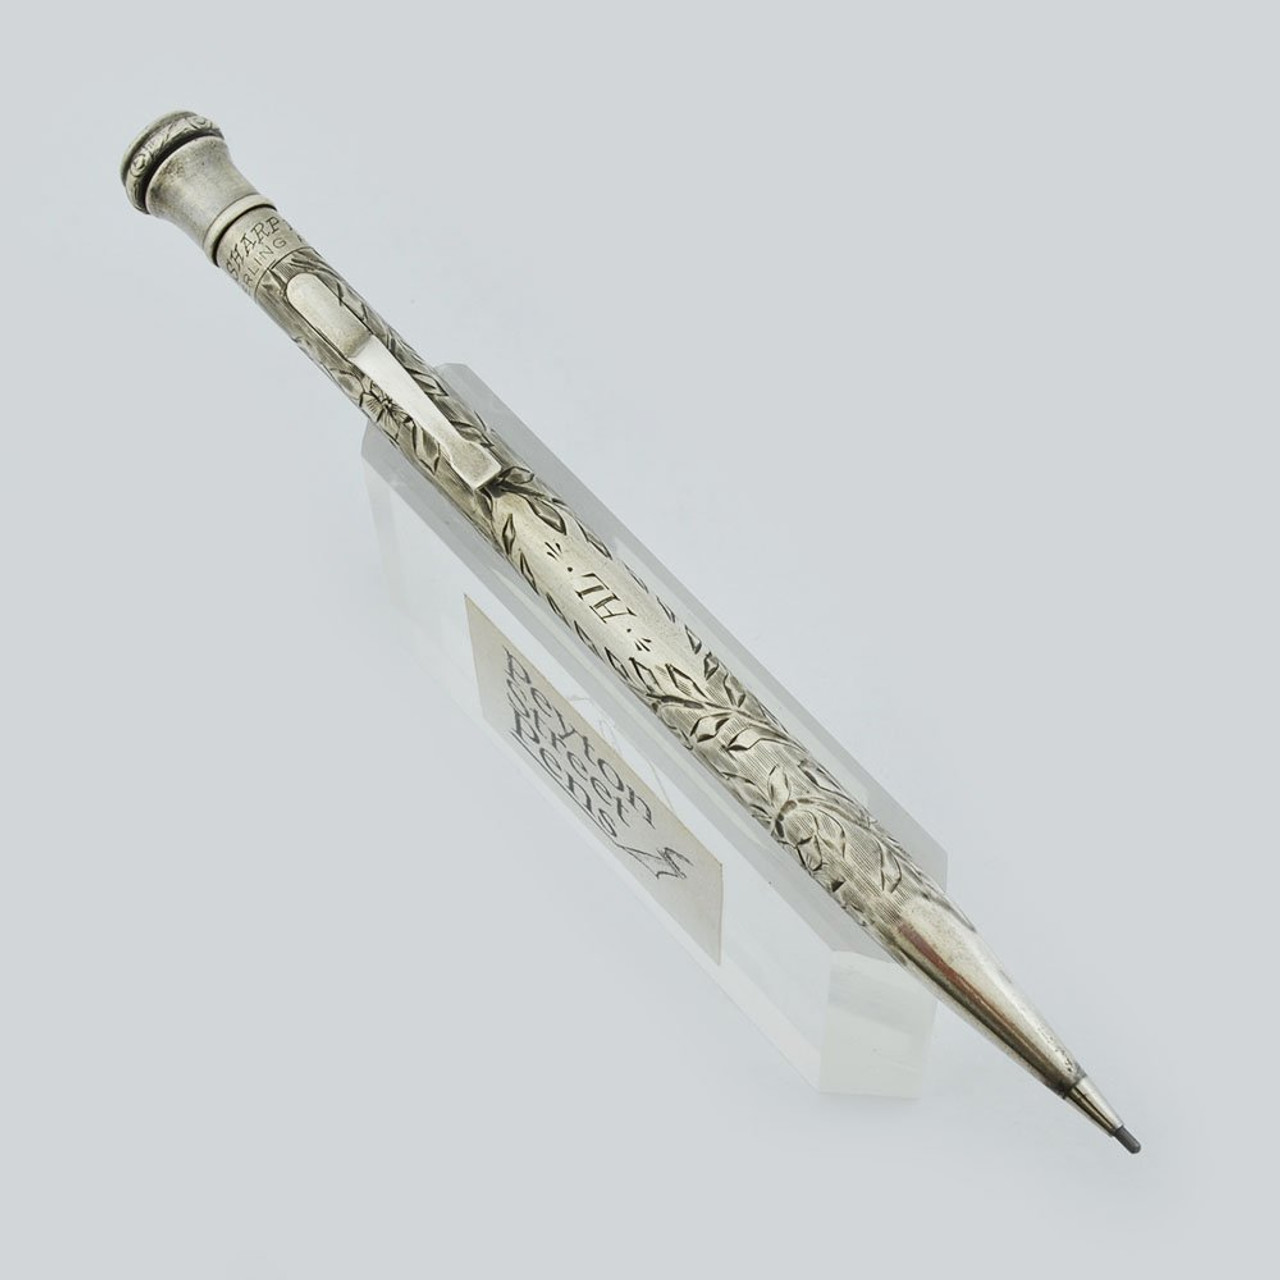 Wahl Eversharp Early Mechanical Pencil - Sterling, Engraved Floral Design (Excellent, Works Well)